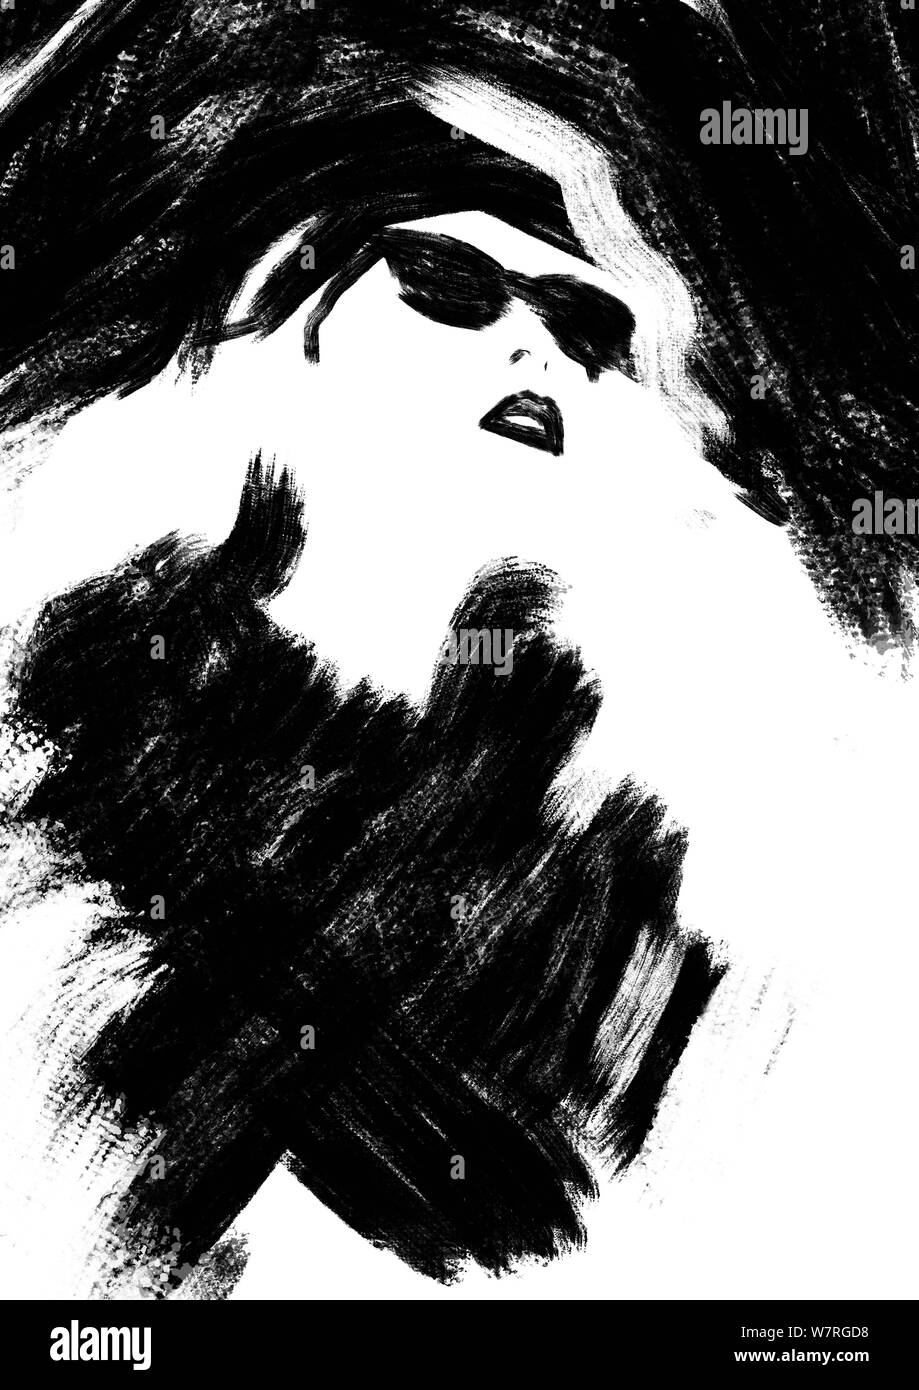 Fashion Illustration Black And White Fashion Sketch Abstract Painting Woman Fashion Background Girl With Hat Smokey Eye Face Big Brush Strokes Stock Photo Alamy